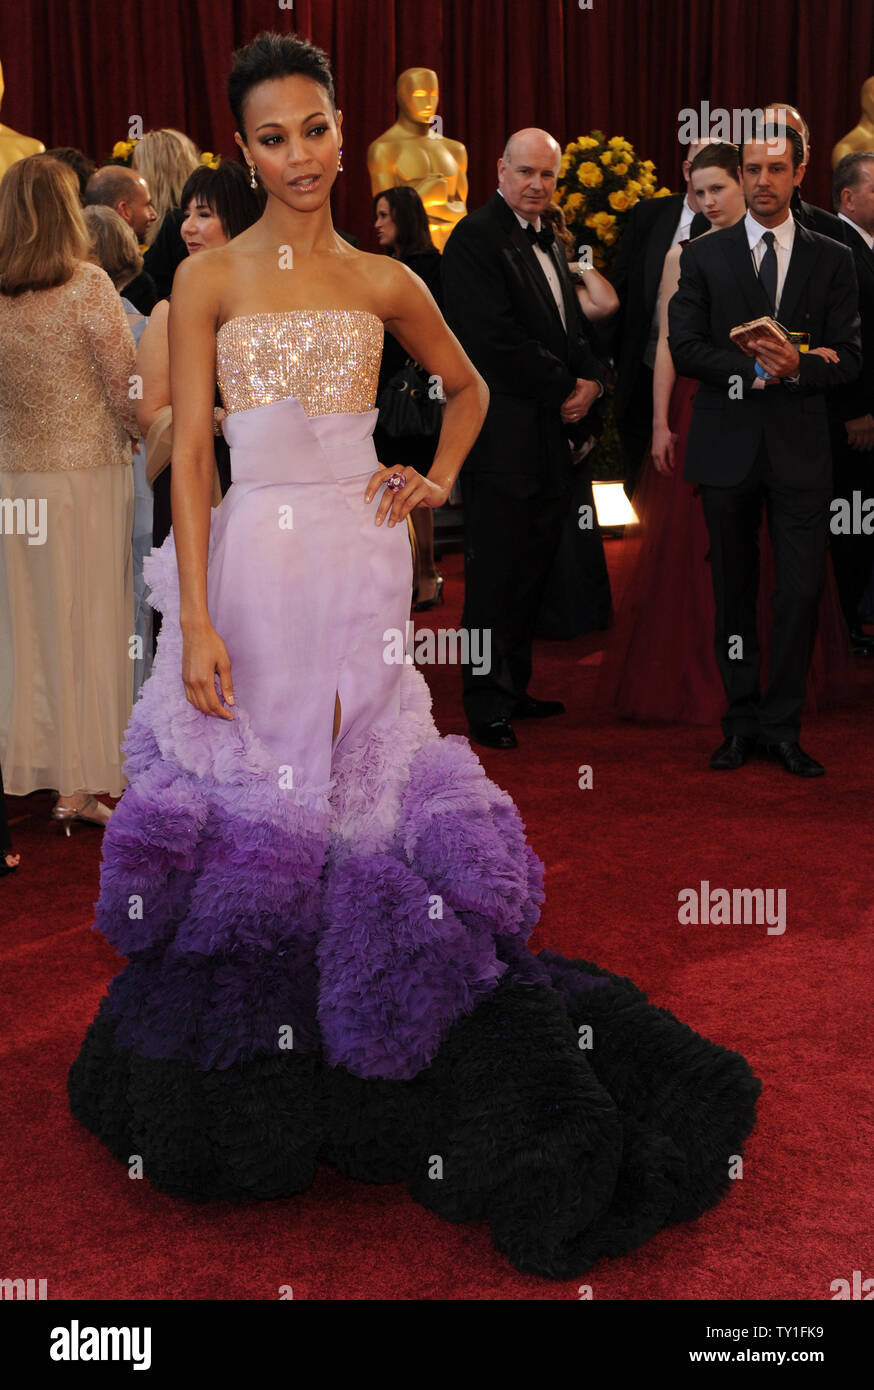 Actress Zoe Saldana arrives at the 82nd annual Academy Awards in Hollywood on March 7, 2010.   UPI/Jim Ruymen Stock Photo